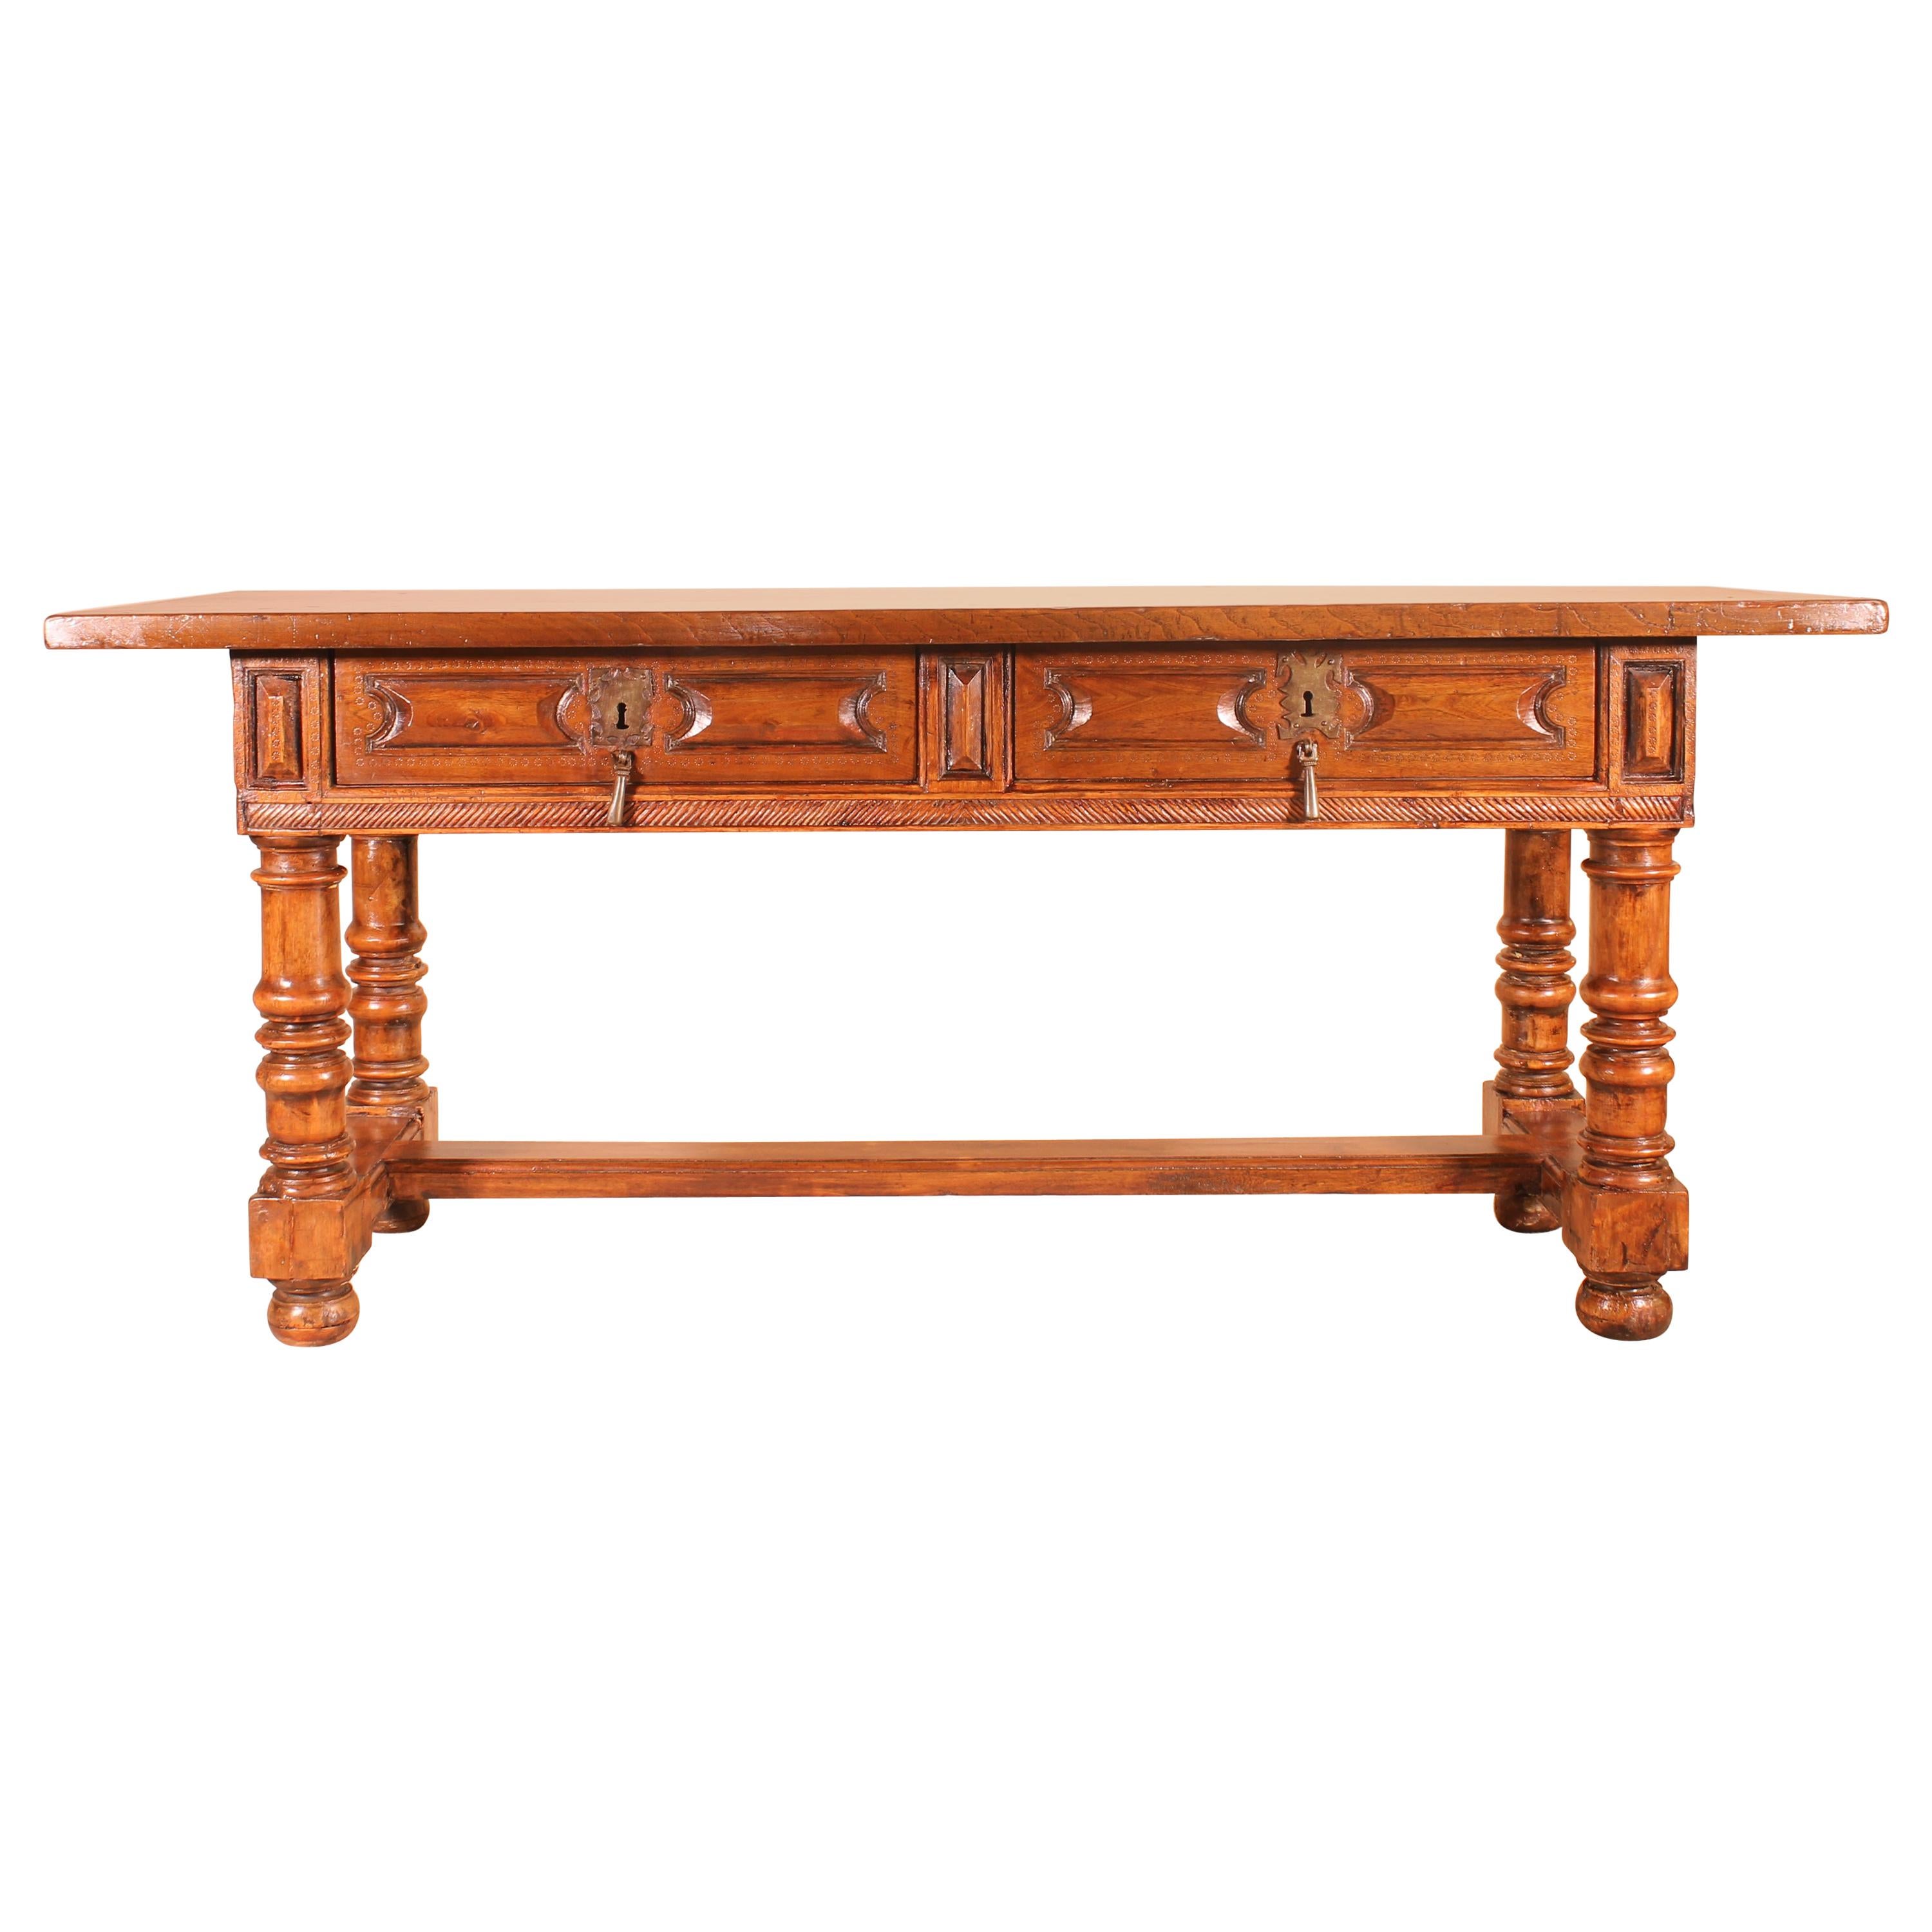 Spanish 16th Century Console or Sofa Table in Walnut and Chestnut